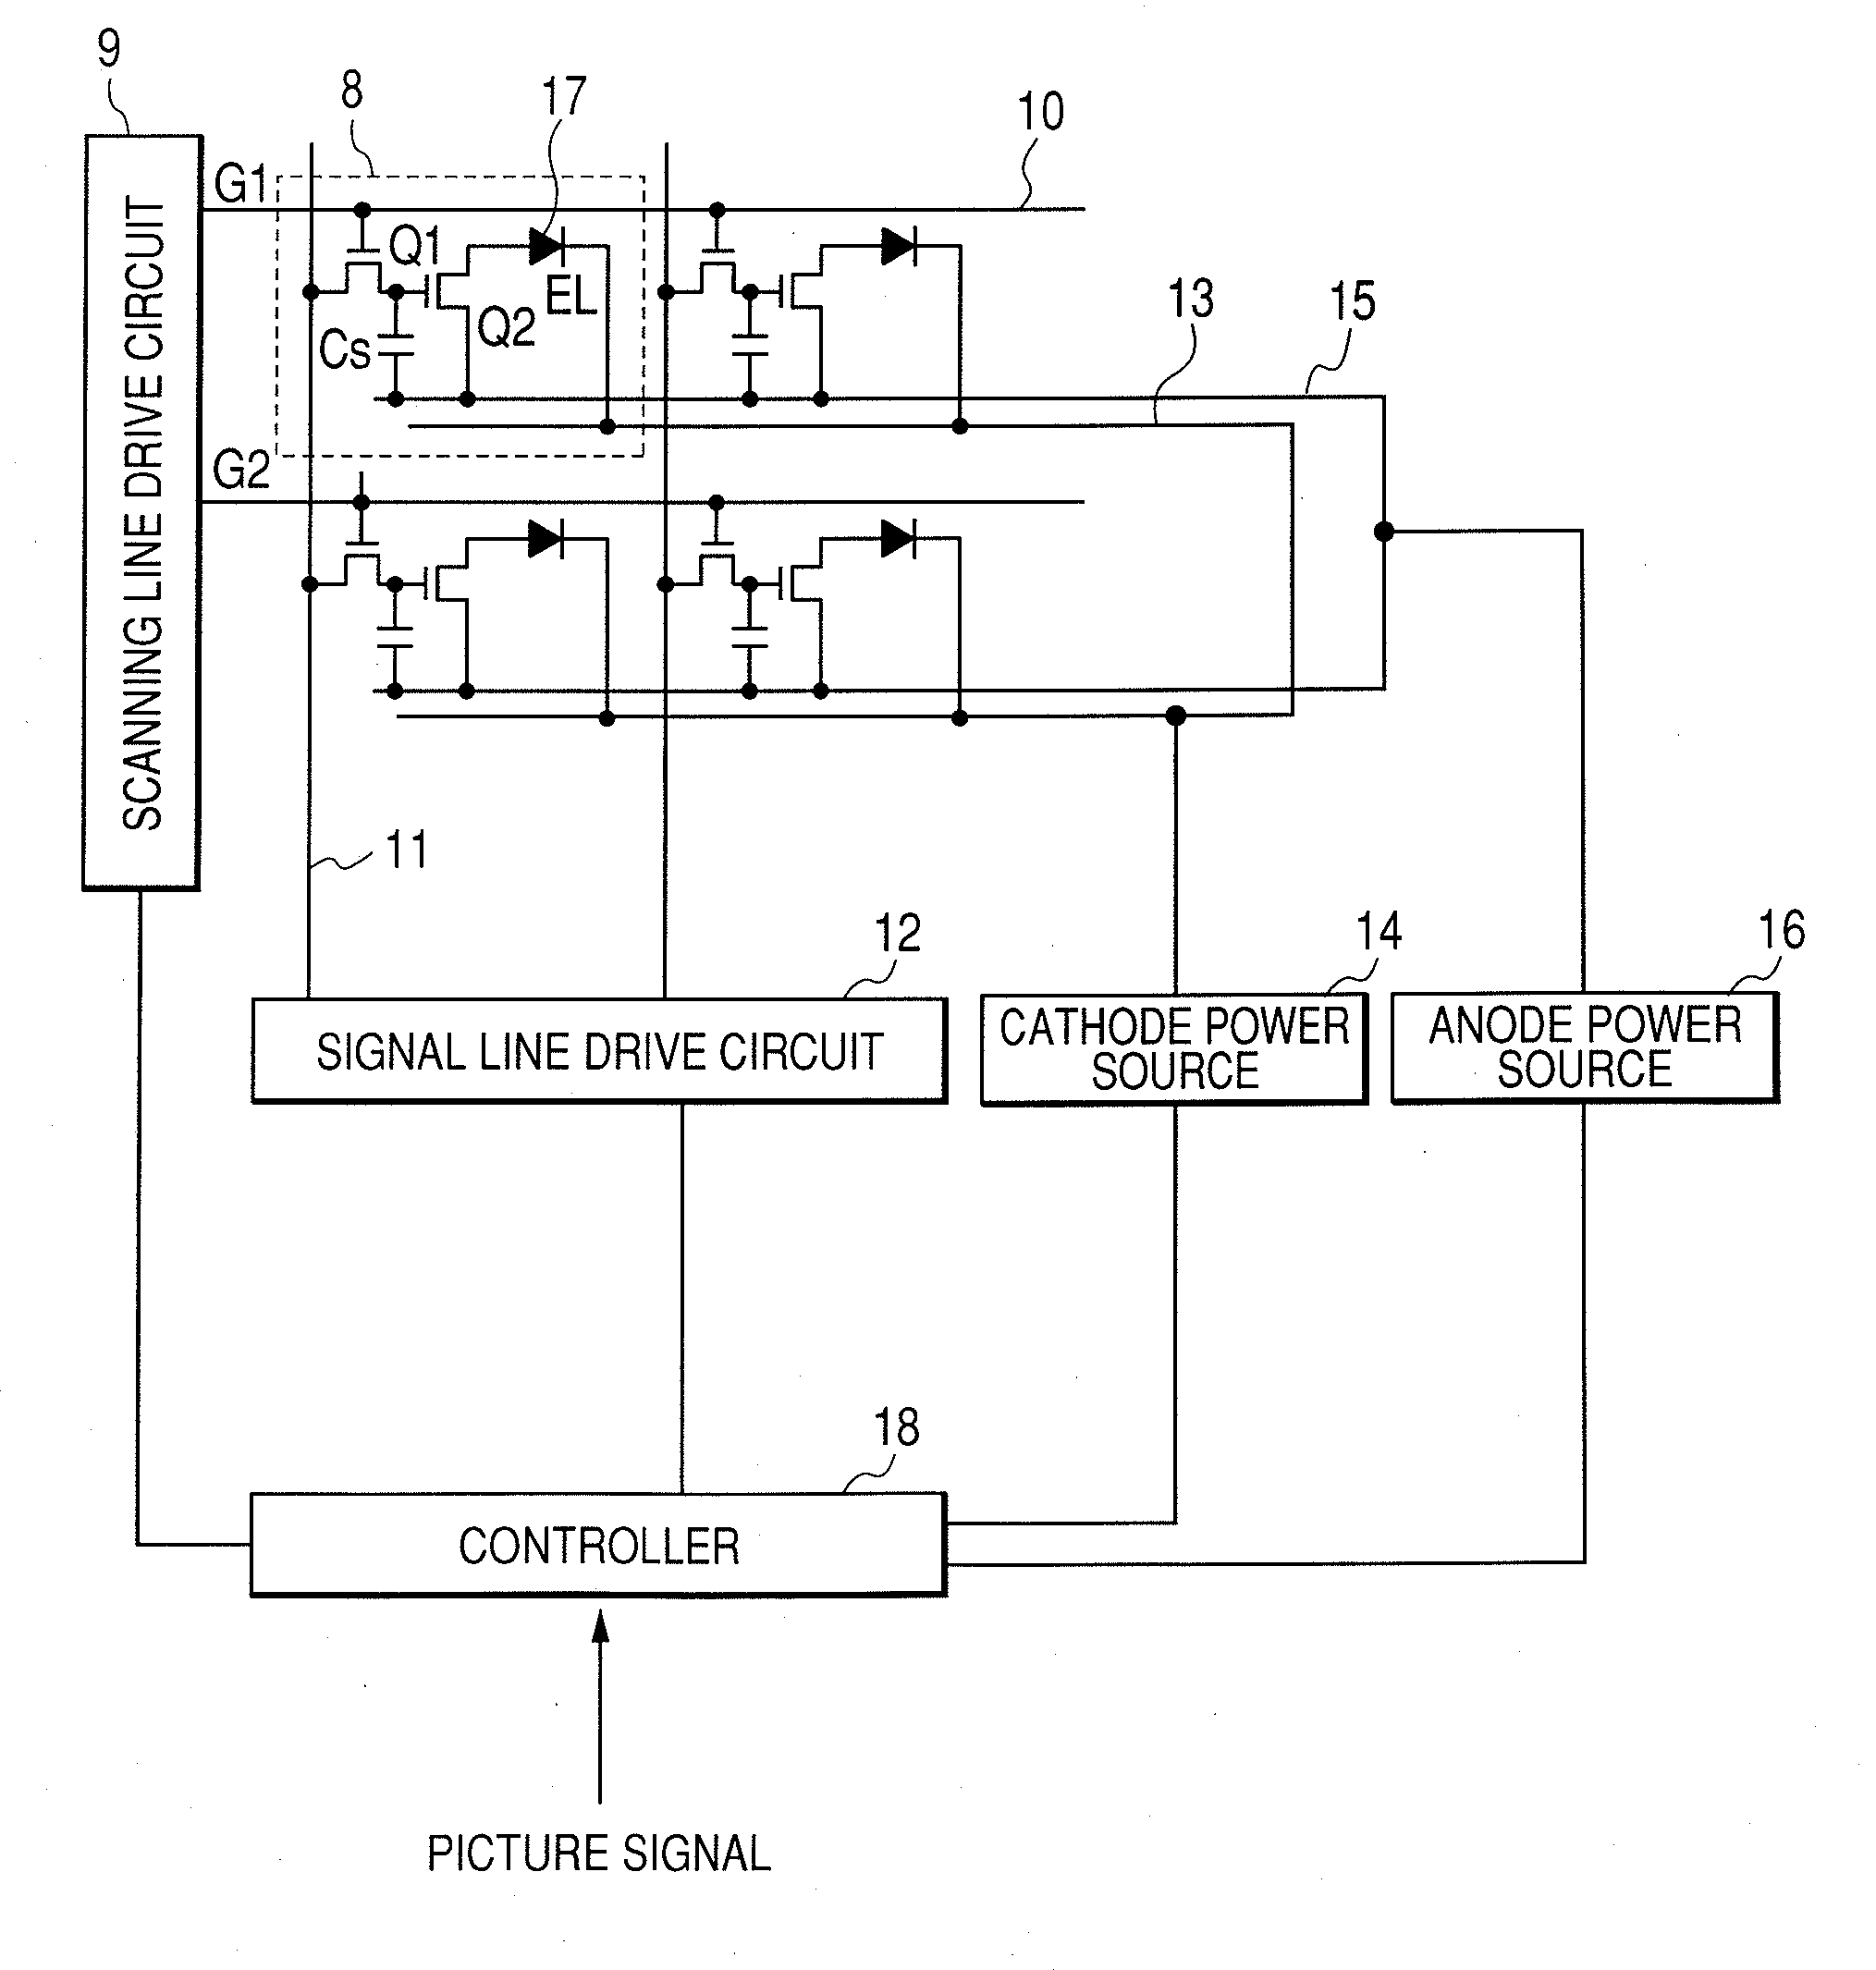 Organic elecroluminescence display apparatus, method of producing the same, and method of repairing a defect